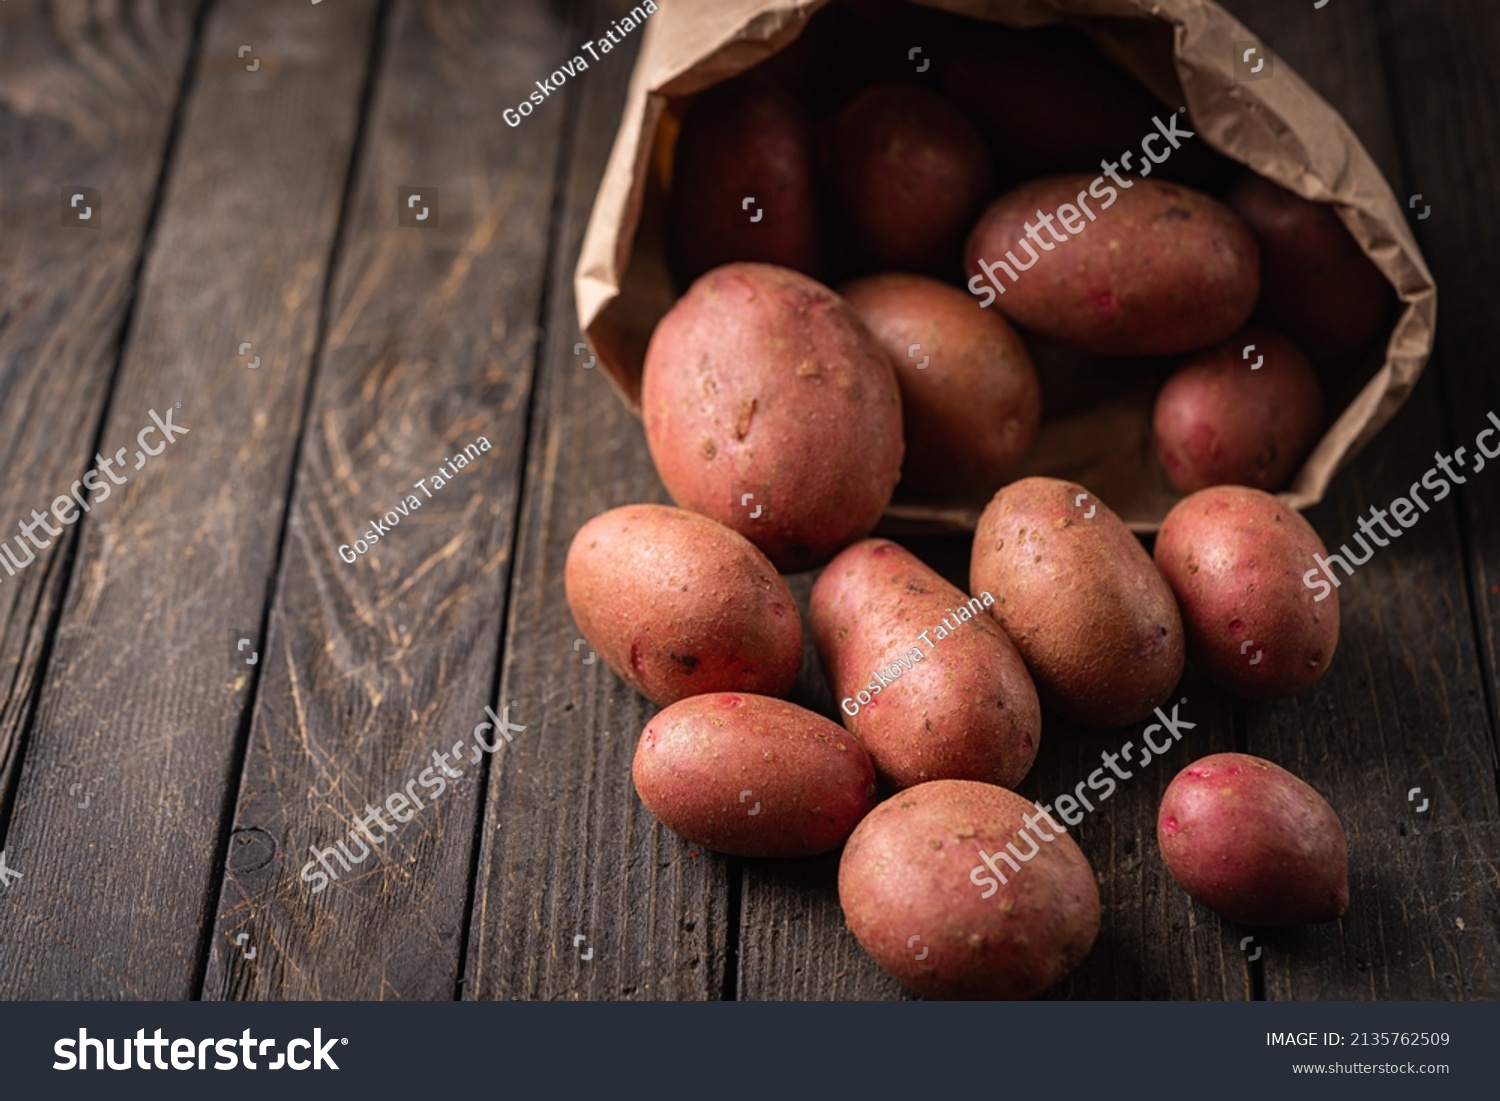 New raw red potatoes in paper bags on wooden background #2135762509